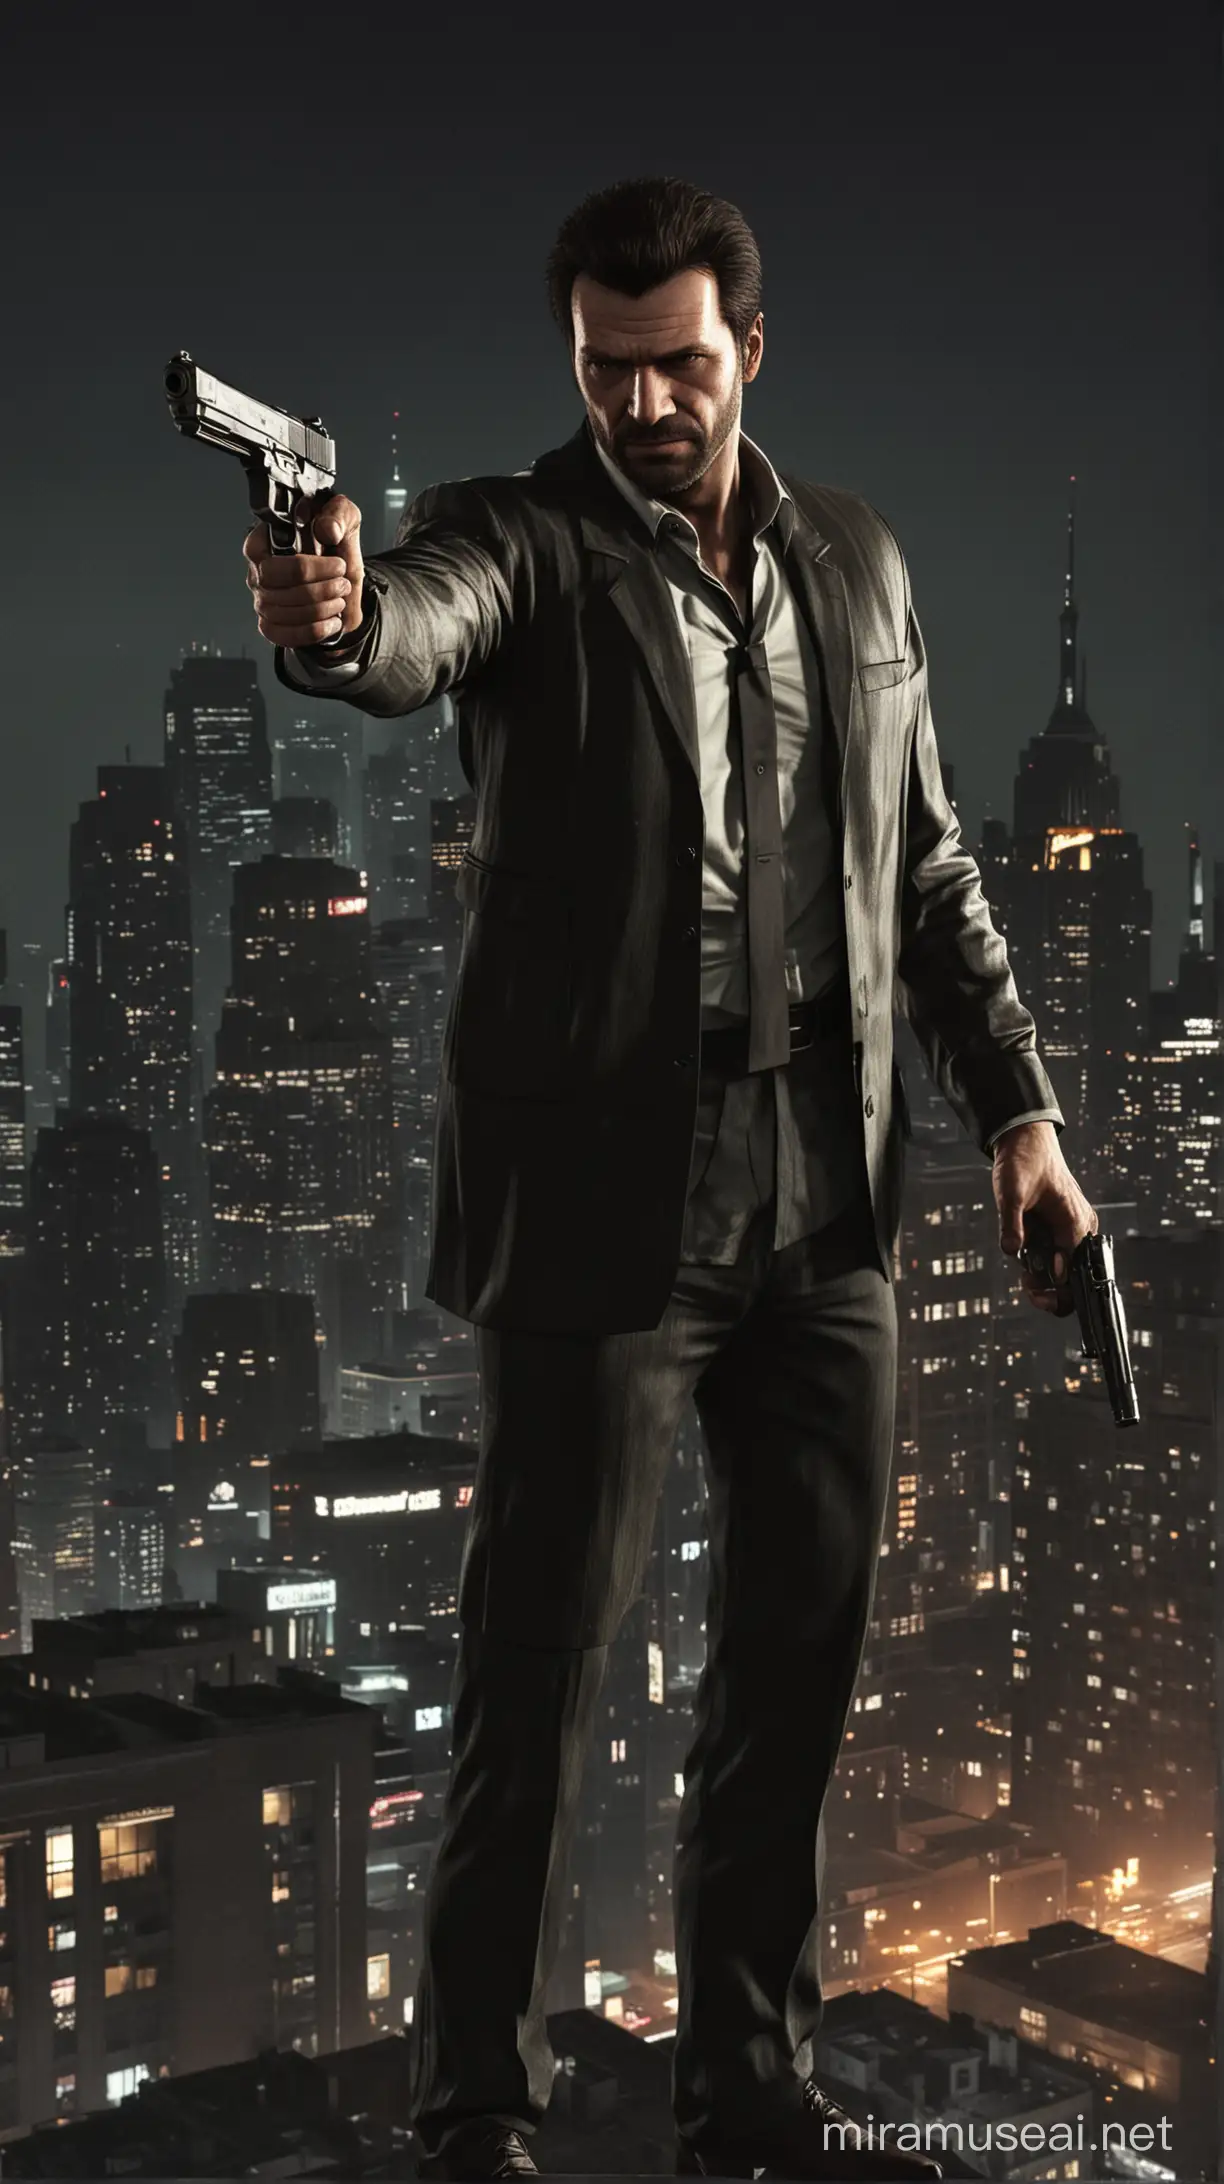 Max Payne 3 Character with Pistol on a New York City Rooftop at Night